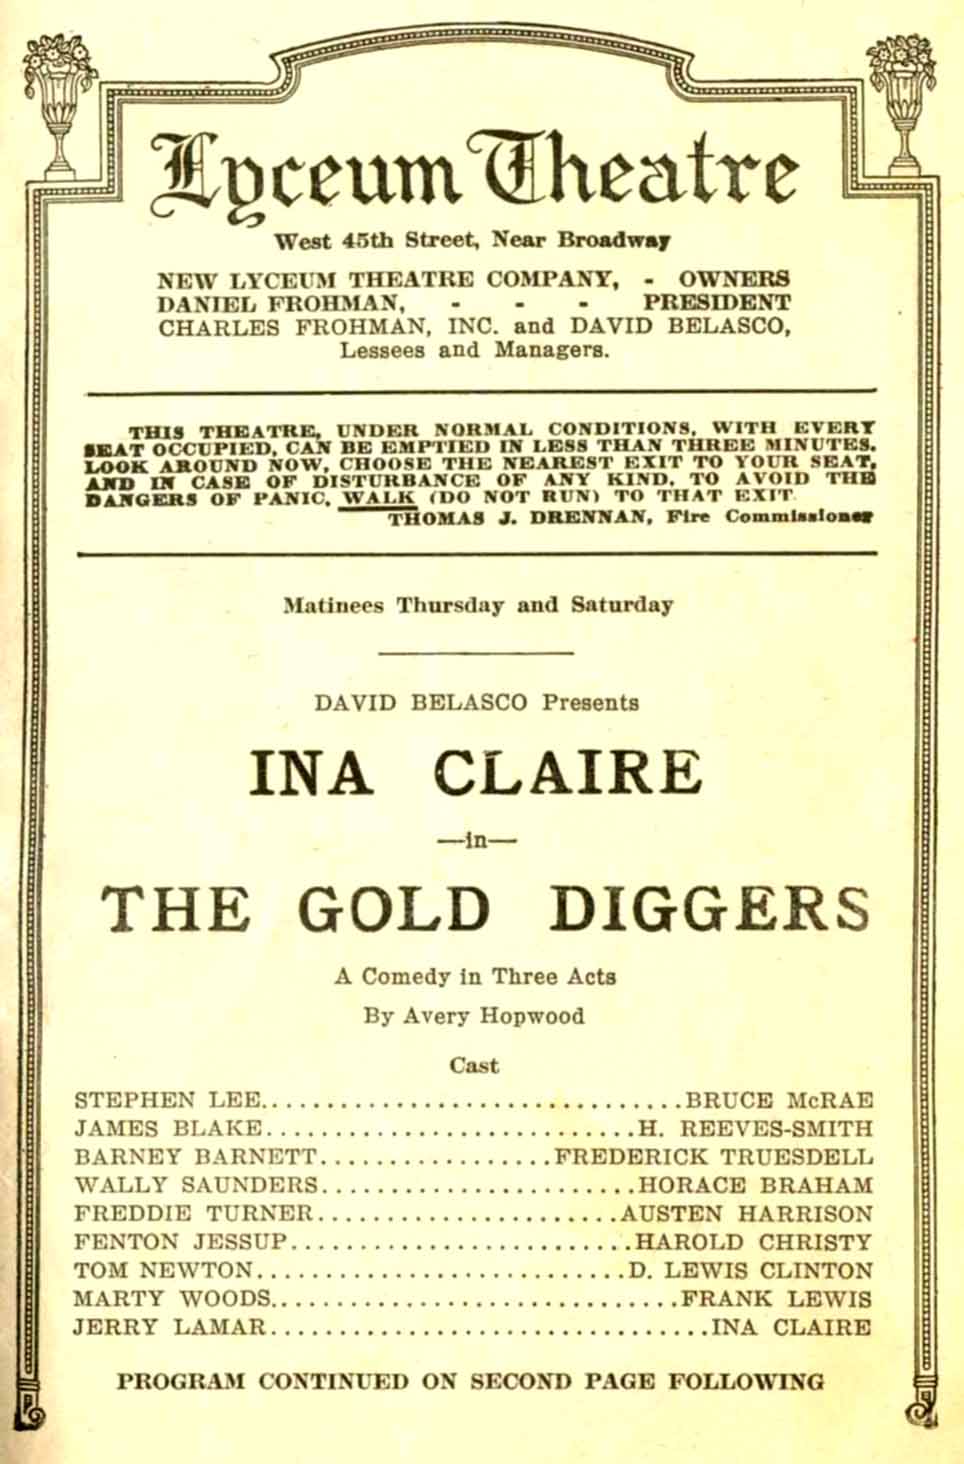 Gold Diggers of 1933 - Wikipedia